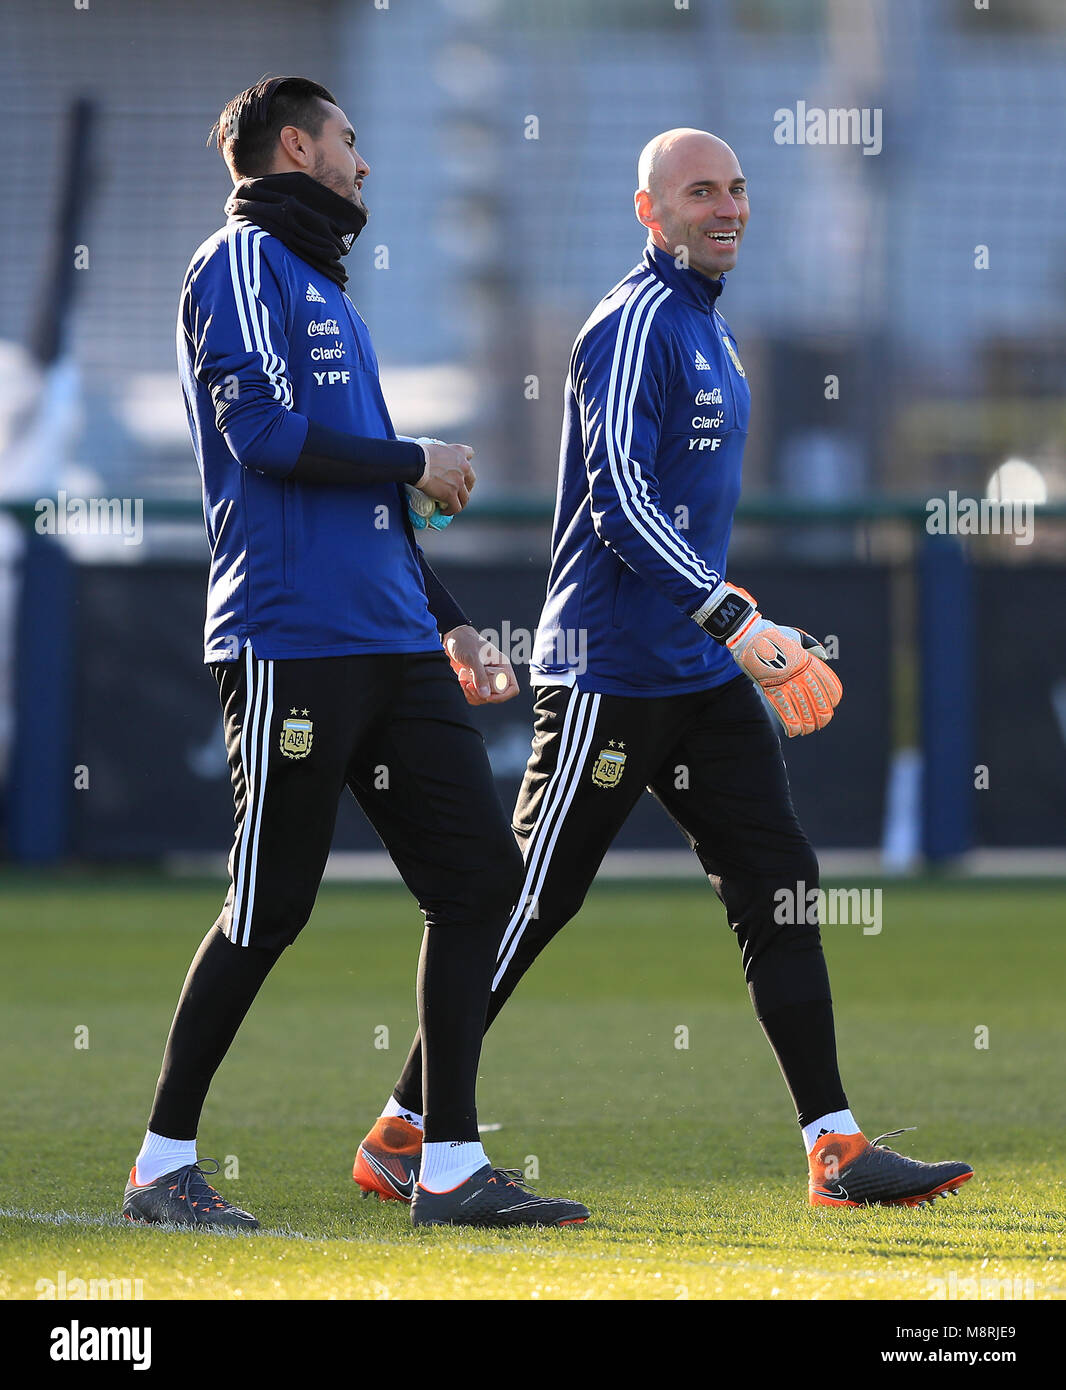 Argentina's goalkeeper Willy Caballero (right) during a training session at the City Football Academy, Manchester. Stock Photo